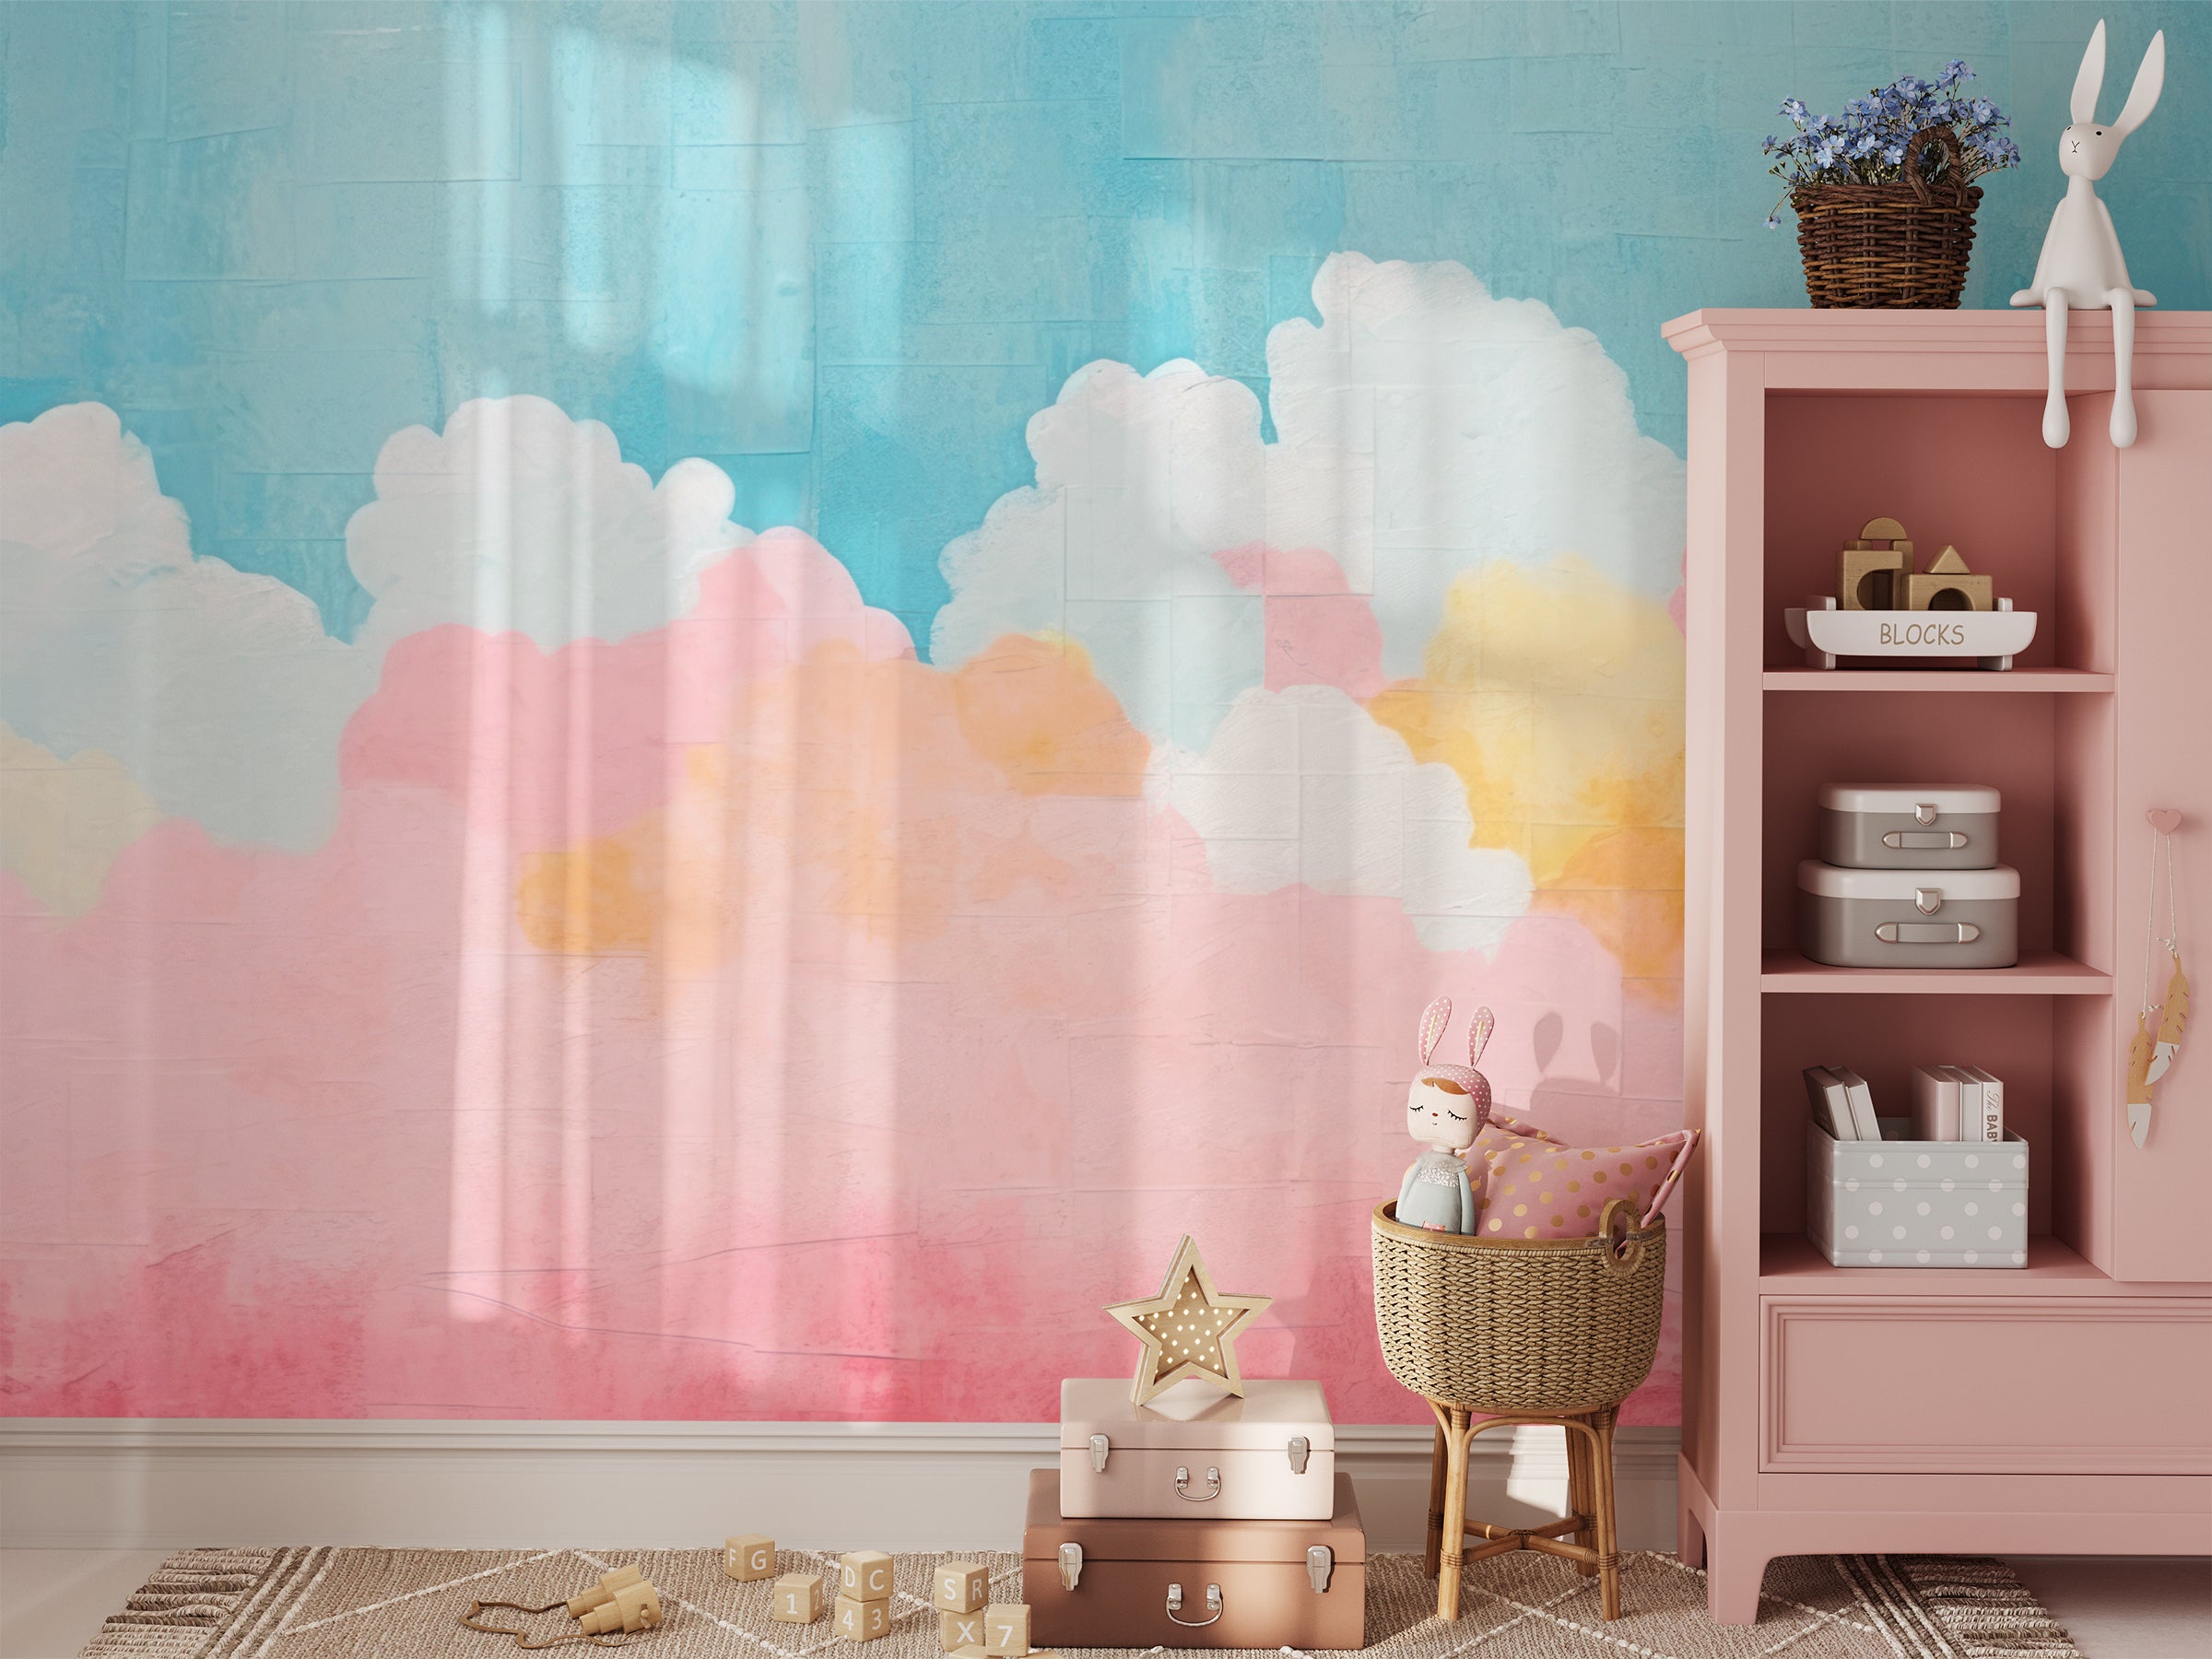 "Child's playroom featuring the 'Candy Clouds Mural' with pastel-colored clouds, complemented by soft-toned furniture and playful decor."